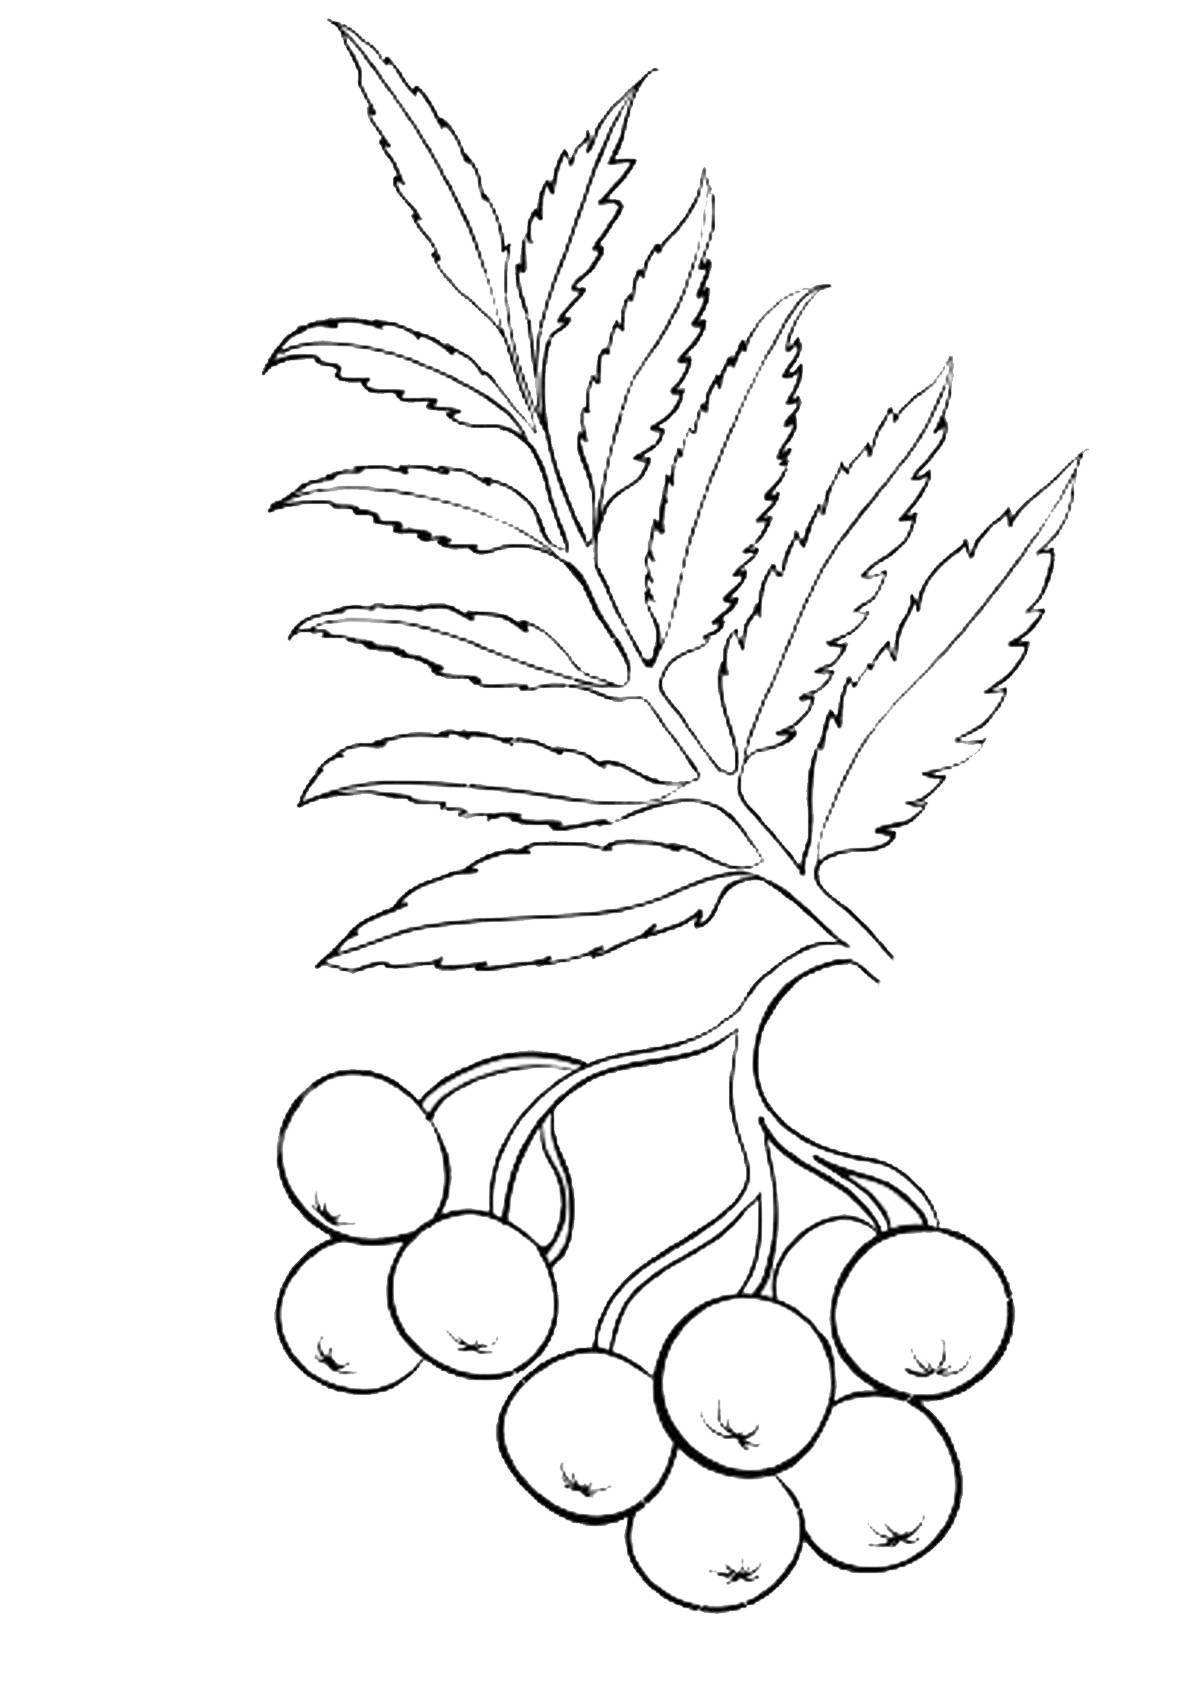 Colorful rowan branch coloring book for kids